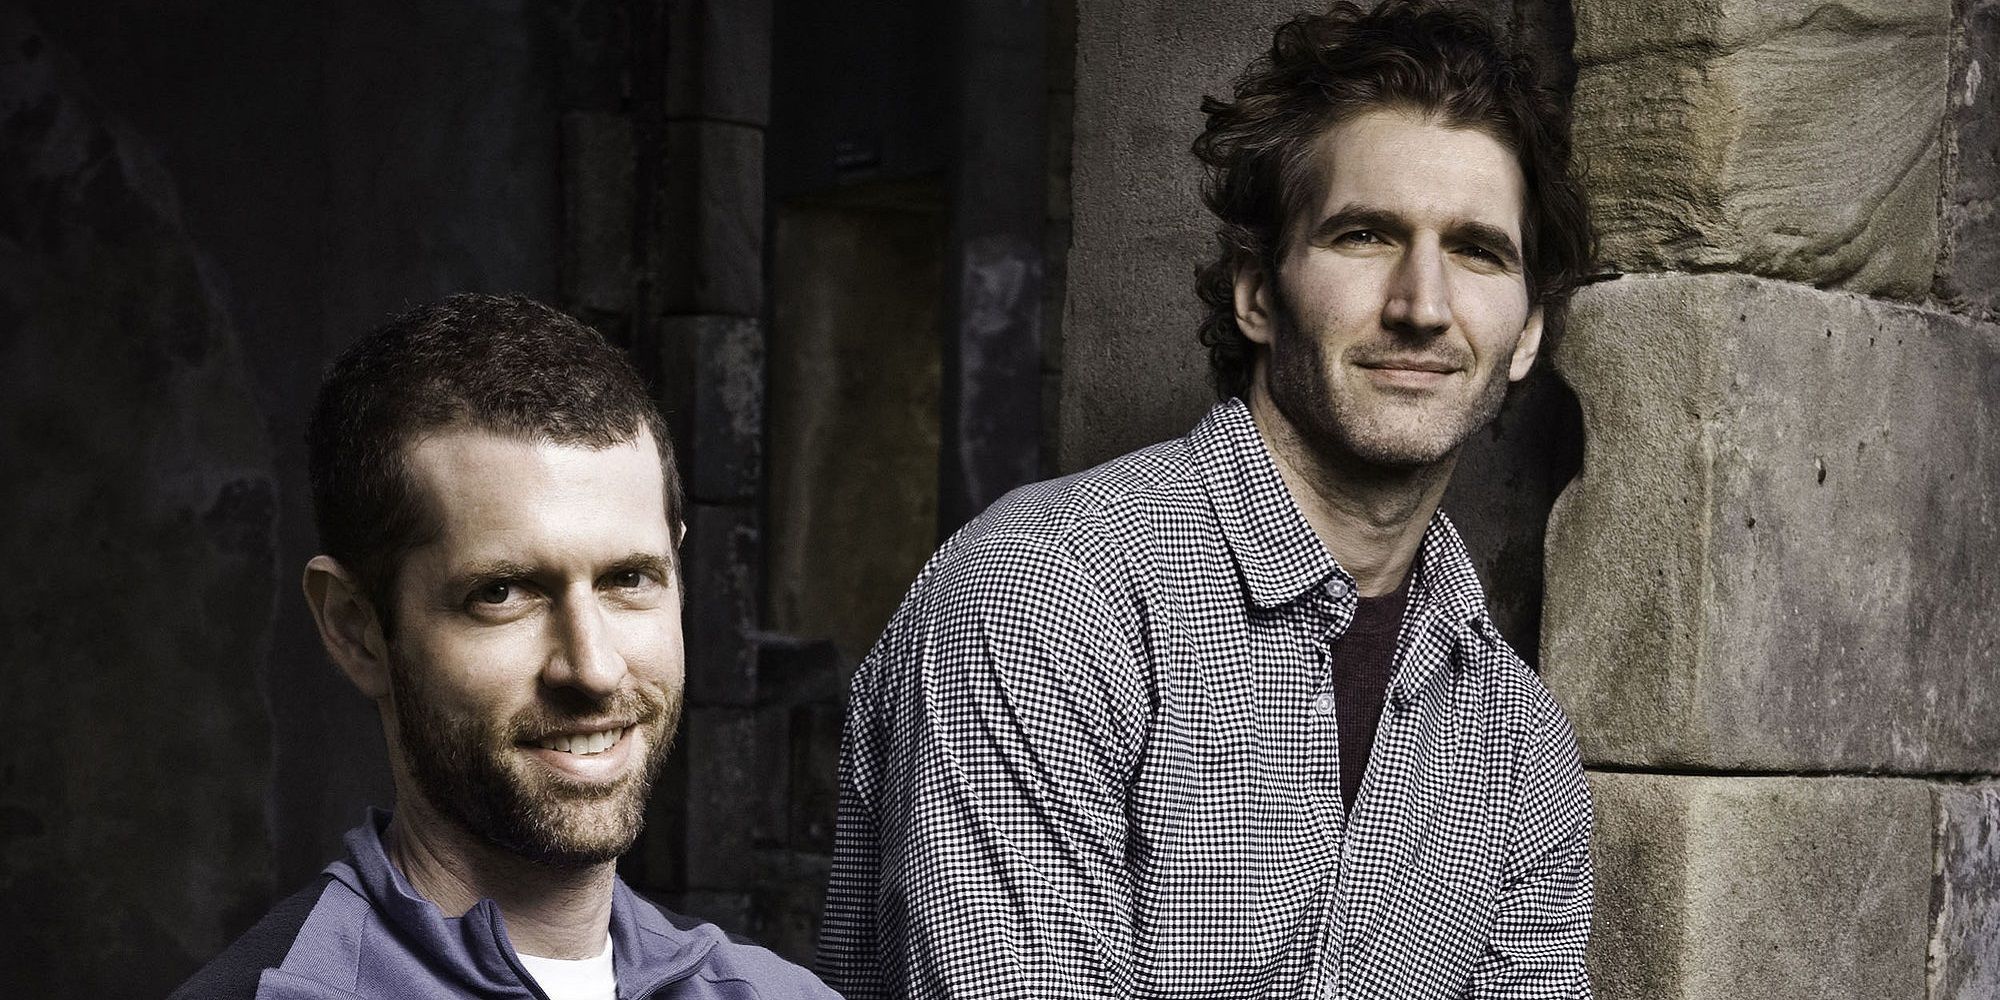 Game of Thrones showrunners David Benioff and DB Weiss